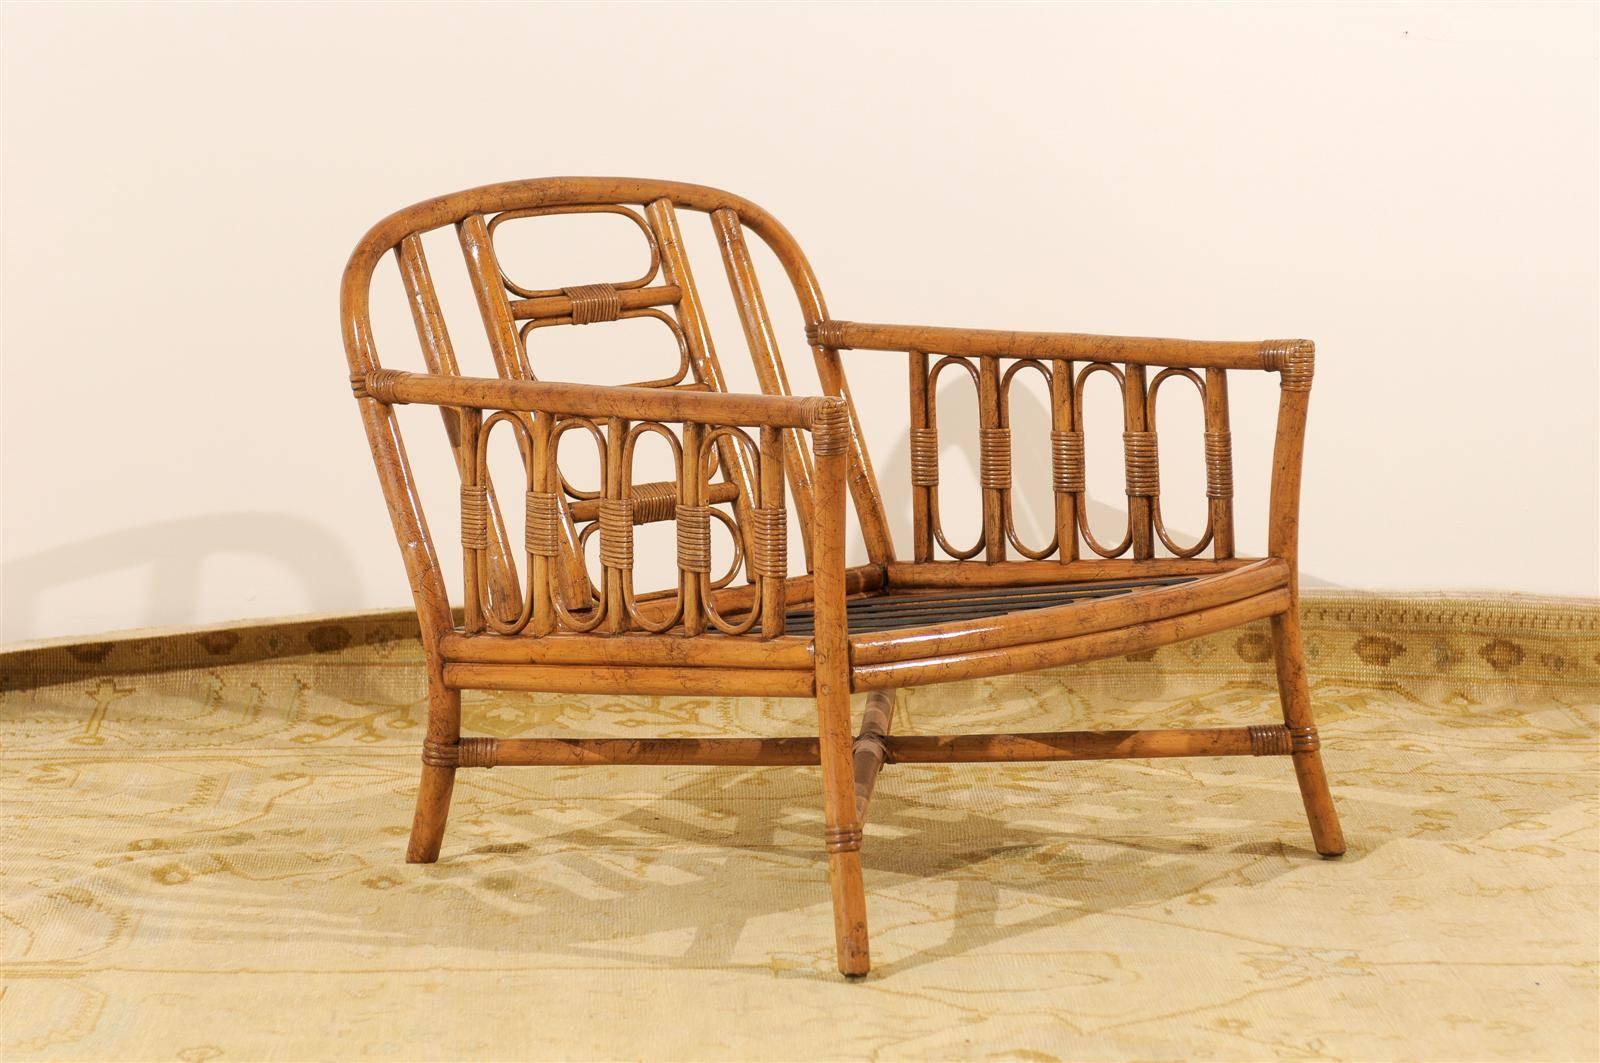 A wonderful pair of highly decorative rattan lounge chairs by Ficks Reed, circa 1970s. Beautifully proportioned with fabulous detail. Excellent restored condition. The chairs have been professionally cleaned and re-lacquered. The rattan displays